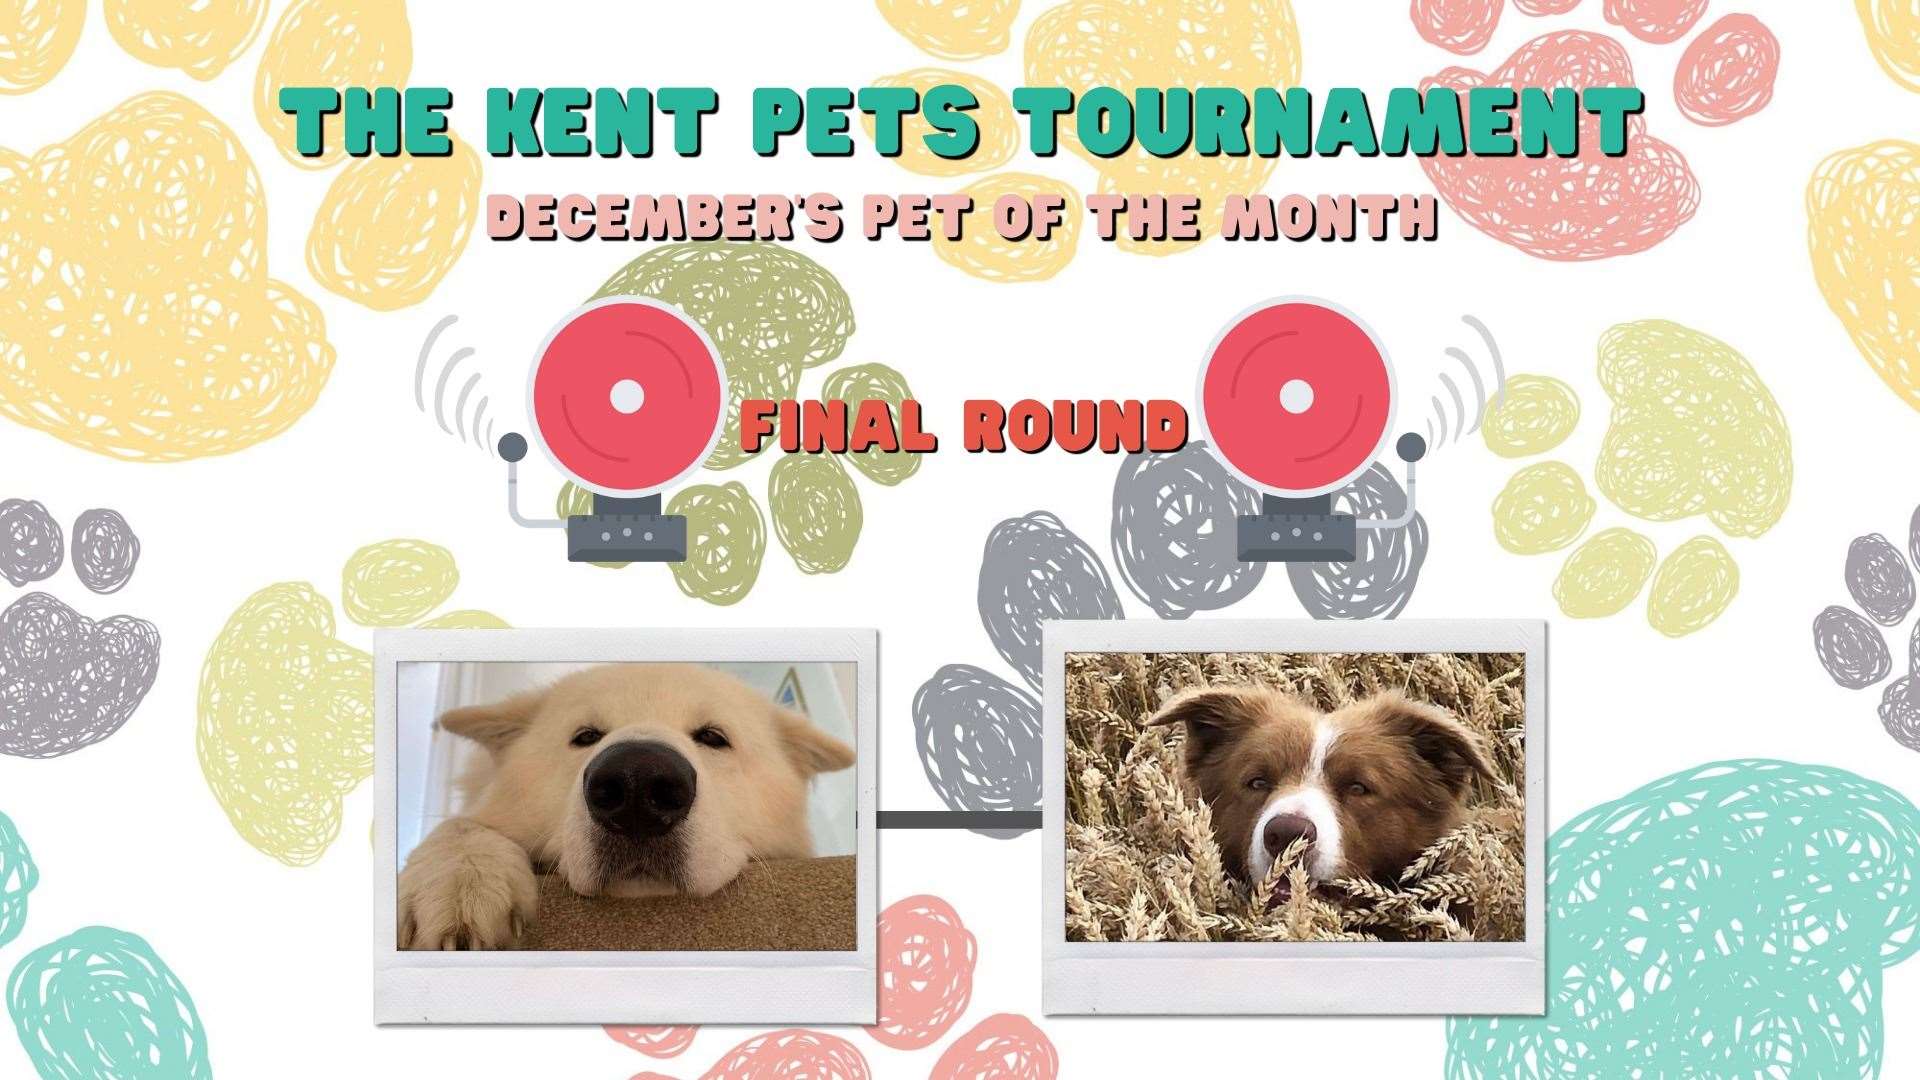 Who should win December's Pet of The Month?